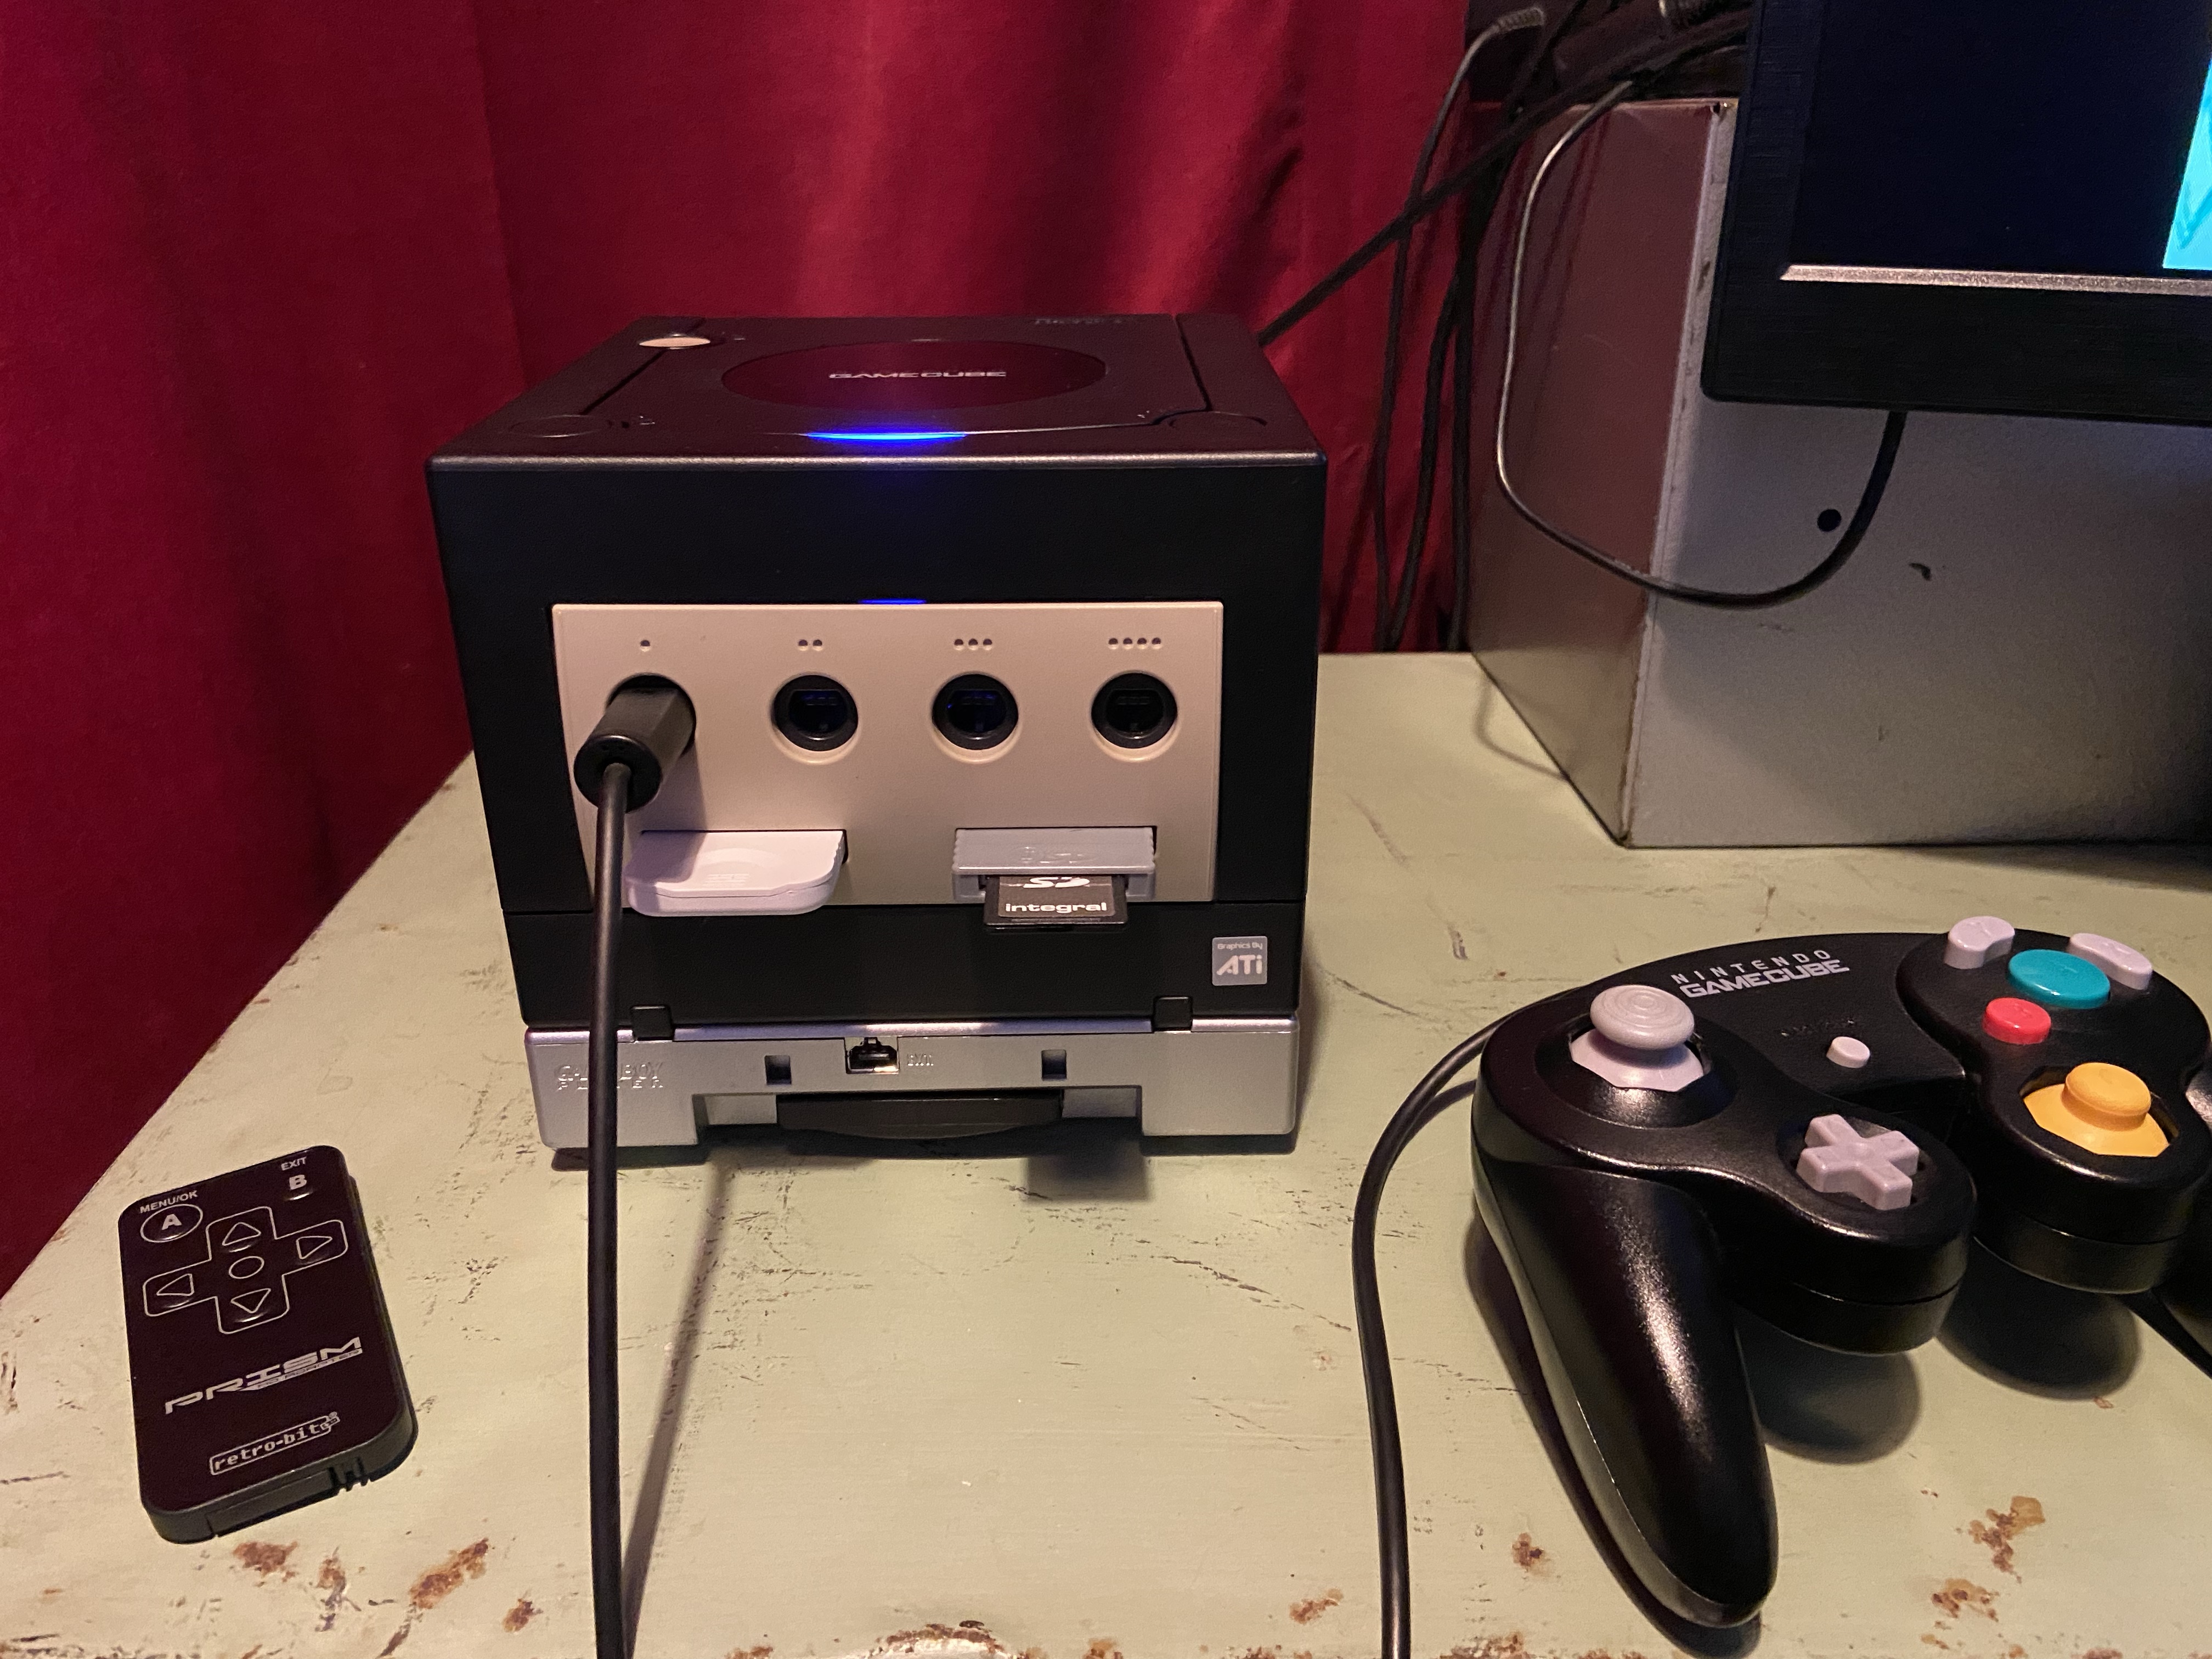 Modded Nintendo GameCube with Game Boy Player